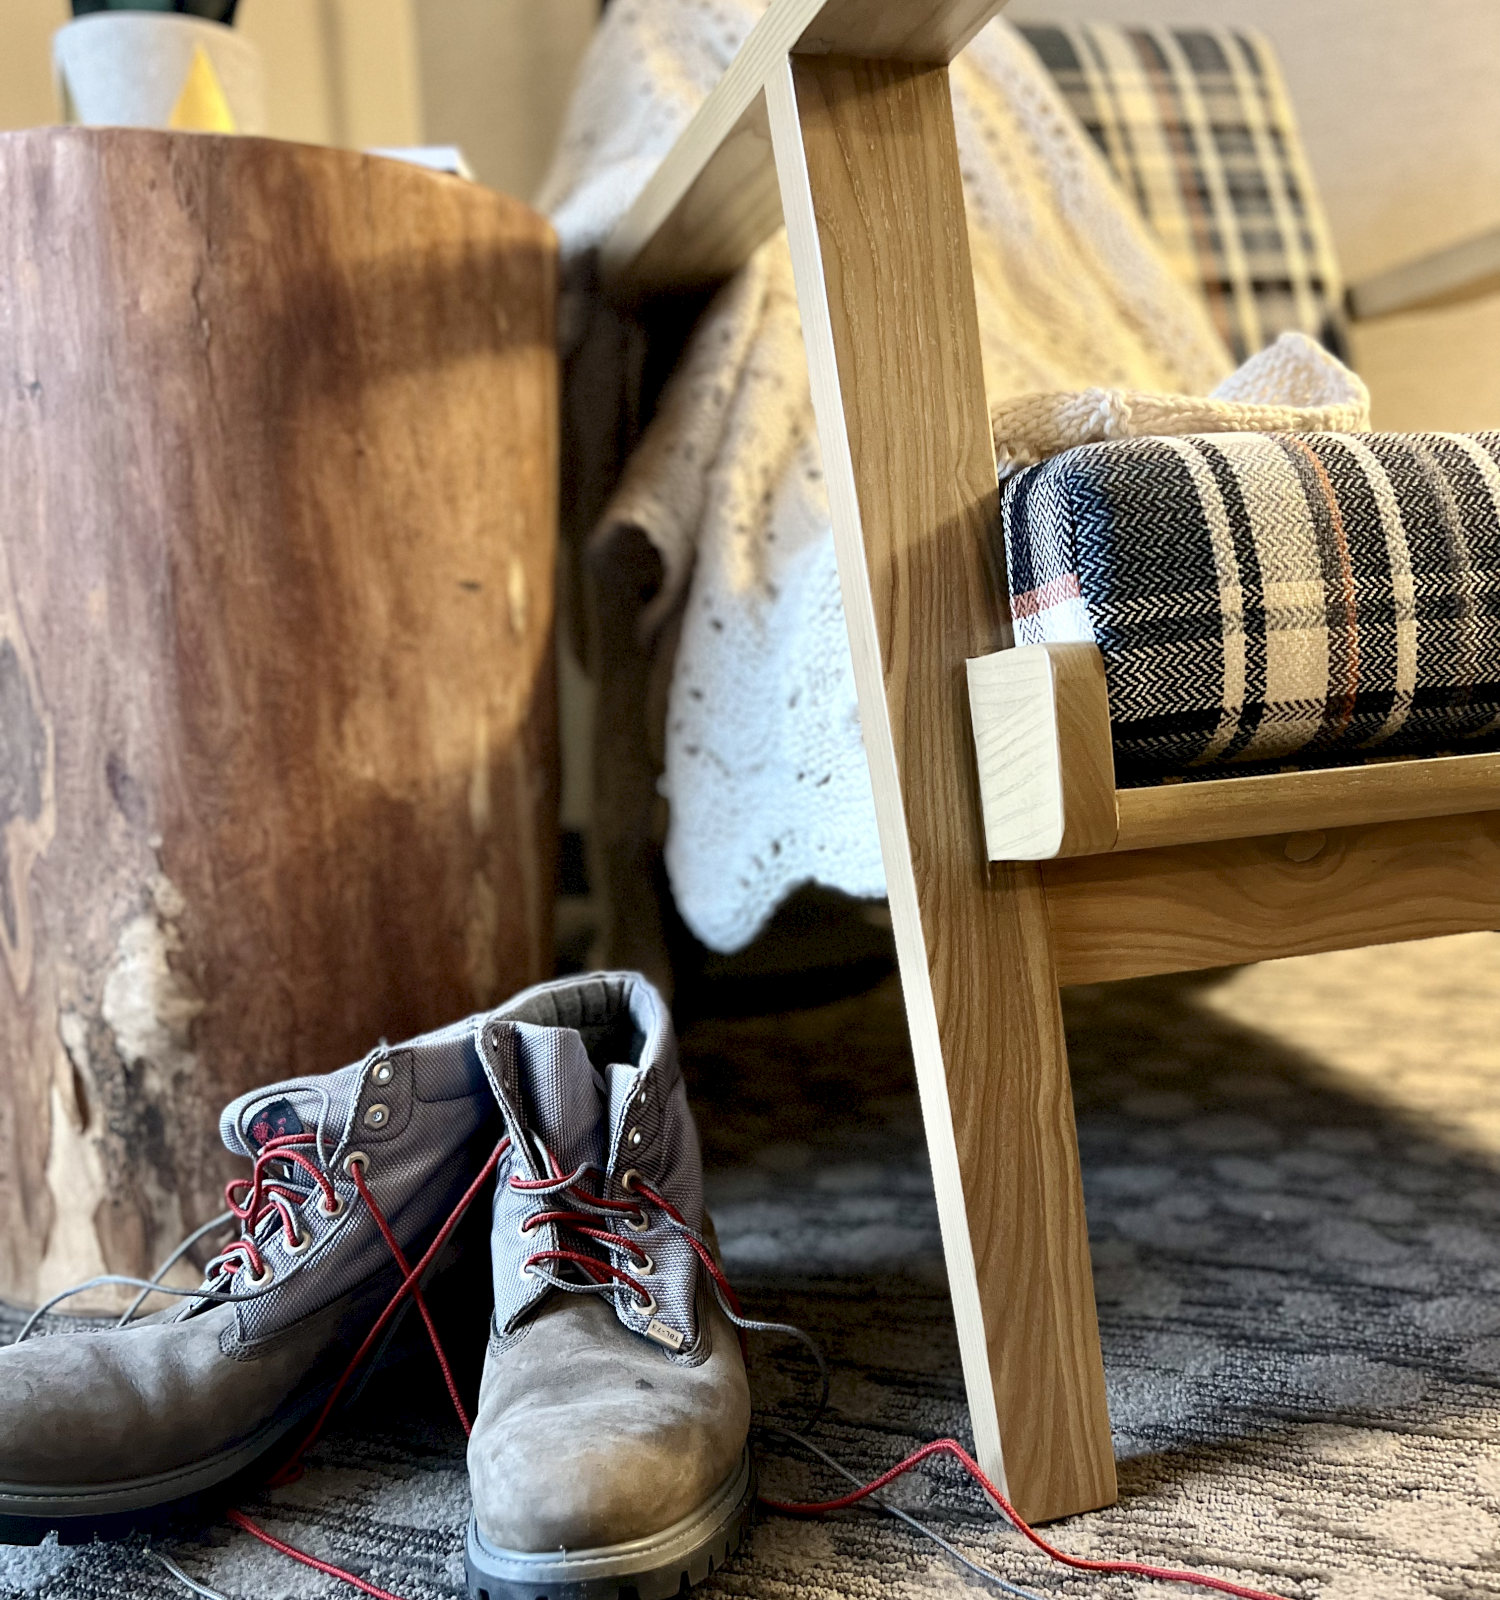 A cozy scene with a wooden chair, plaid blanket, tree stump sidetable, and a pair of boots with red laces on a patterned carpet.